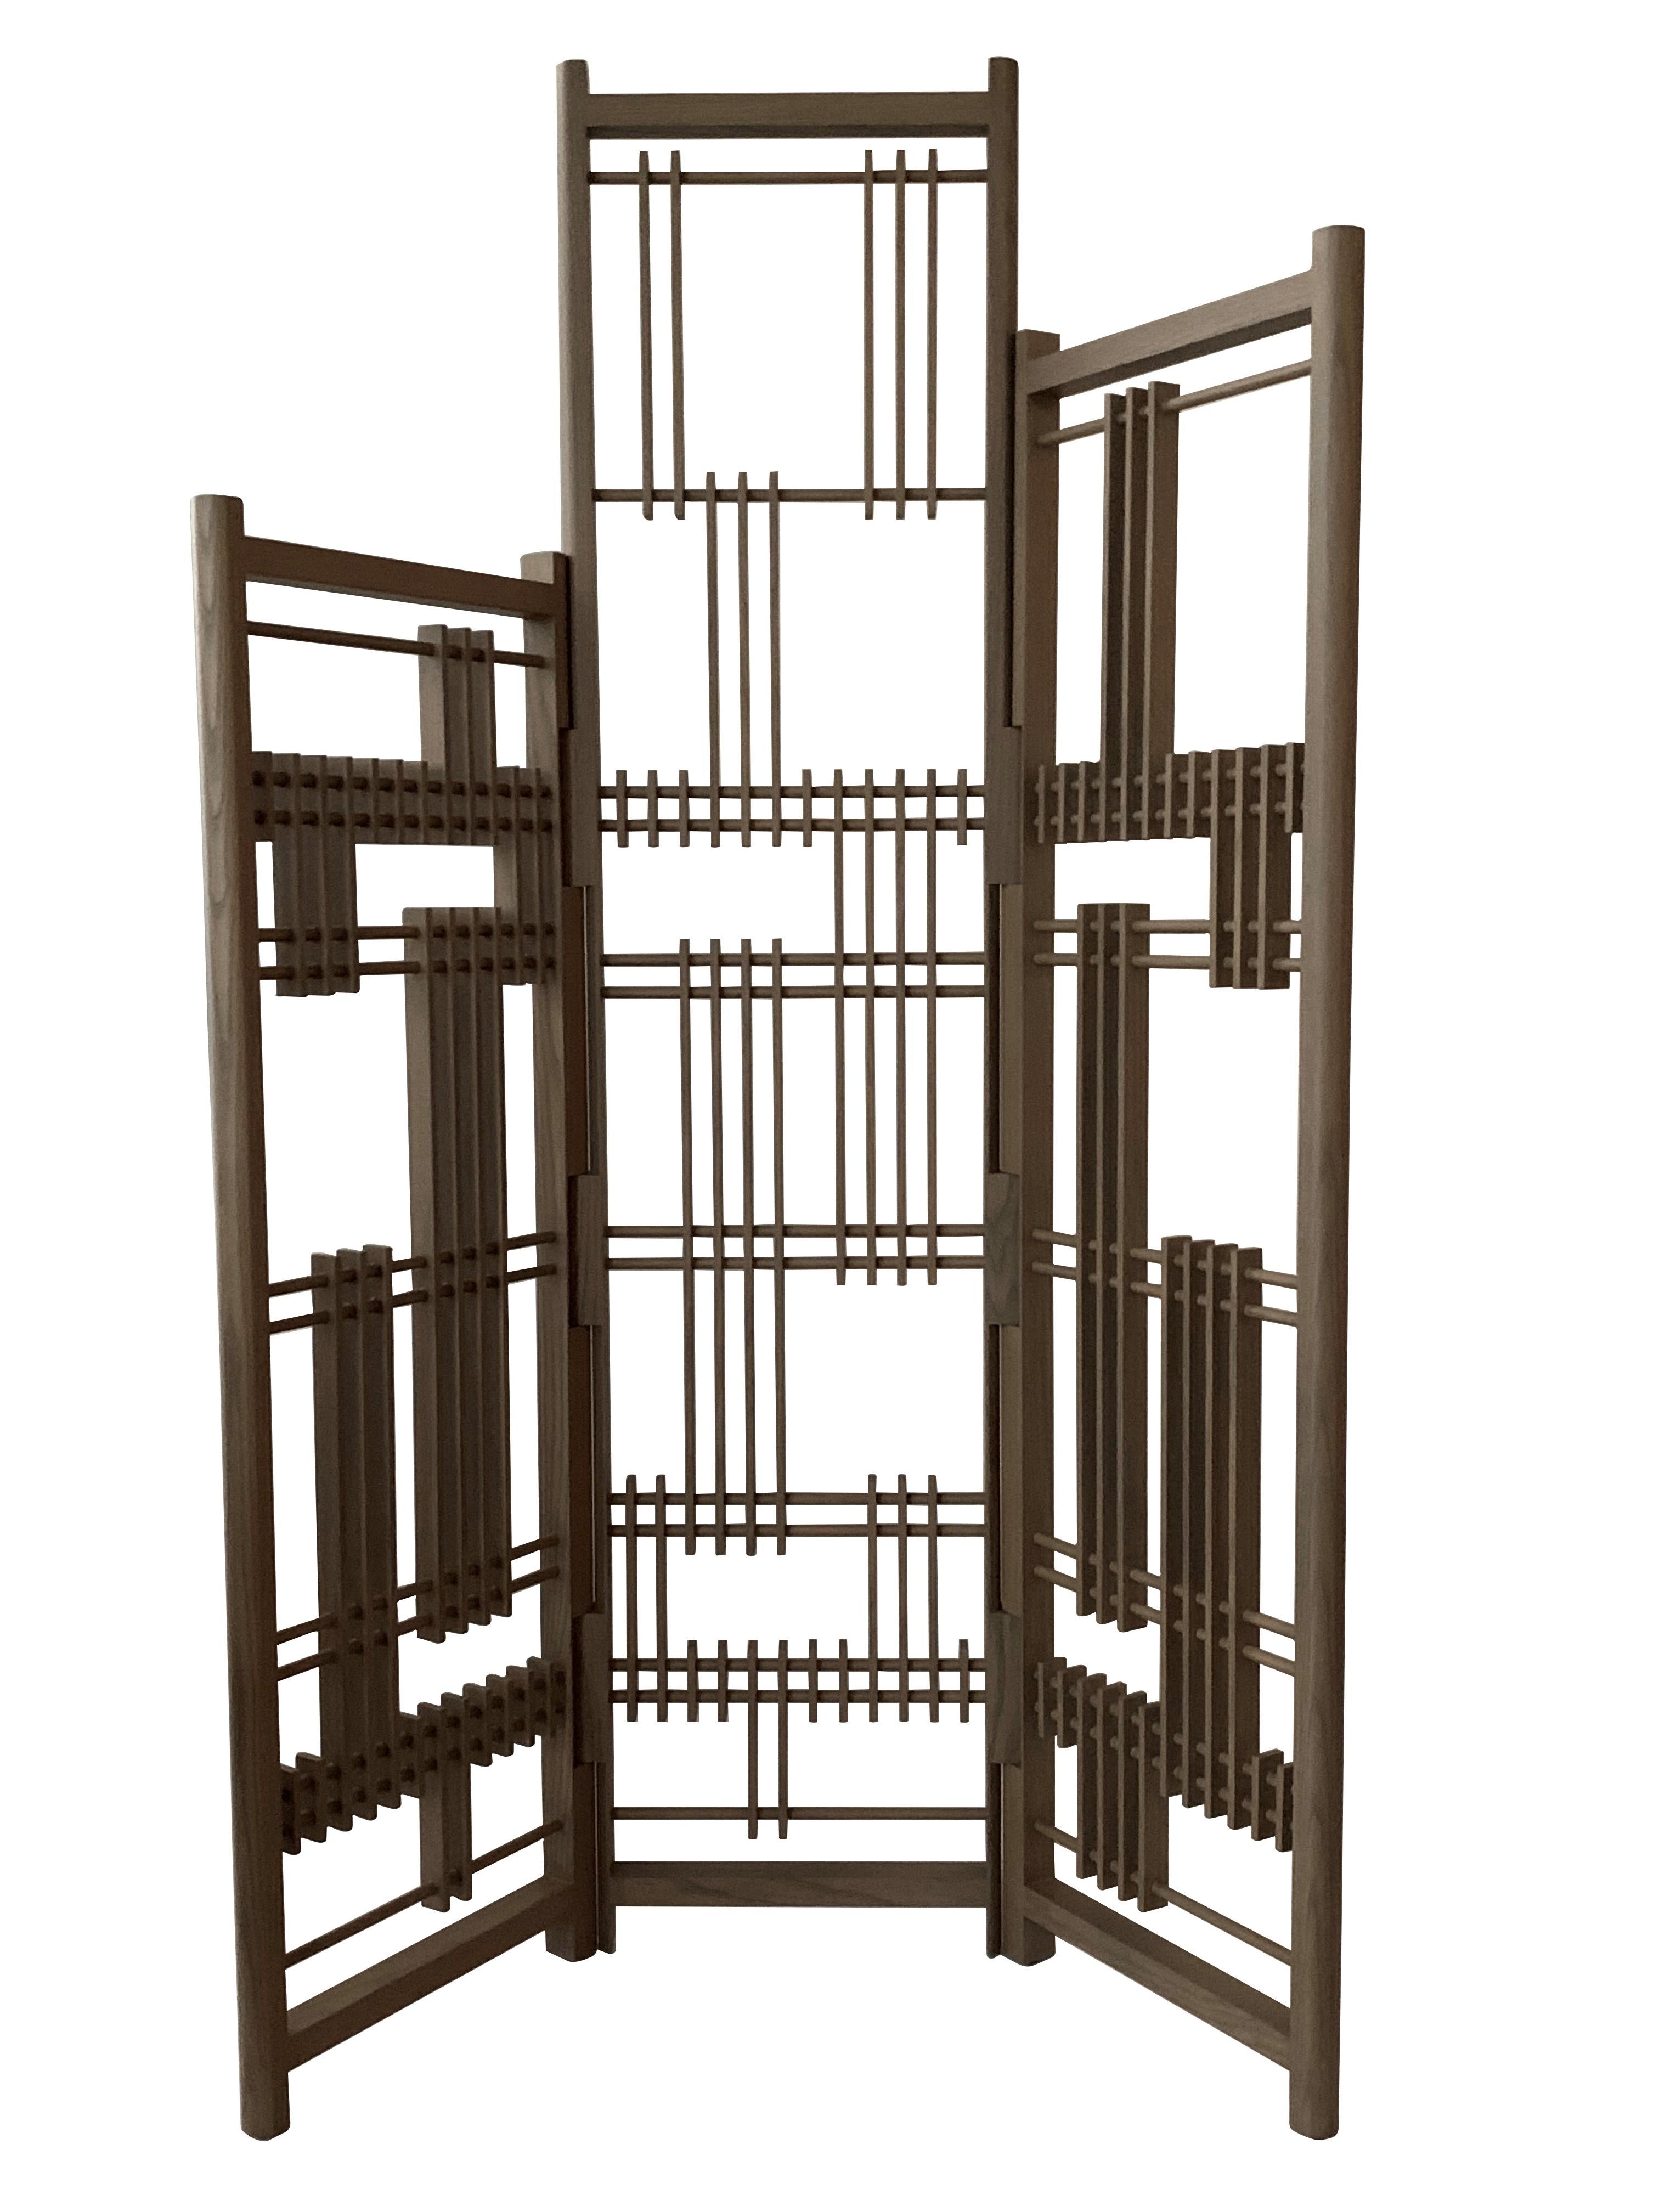 Modern Wooden Screen 3 Panels Interlock André Fu Living Partition Dividers Bronze New For Sale